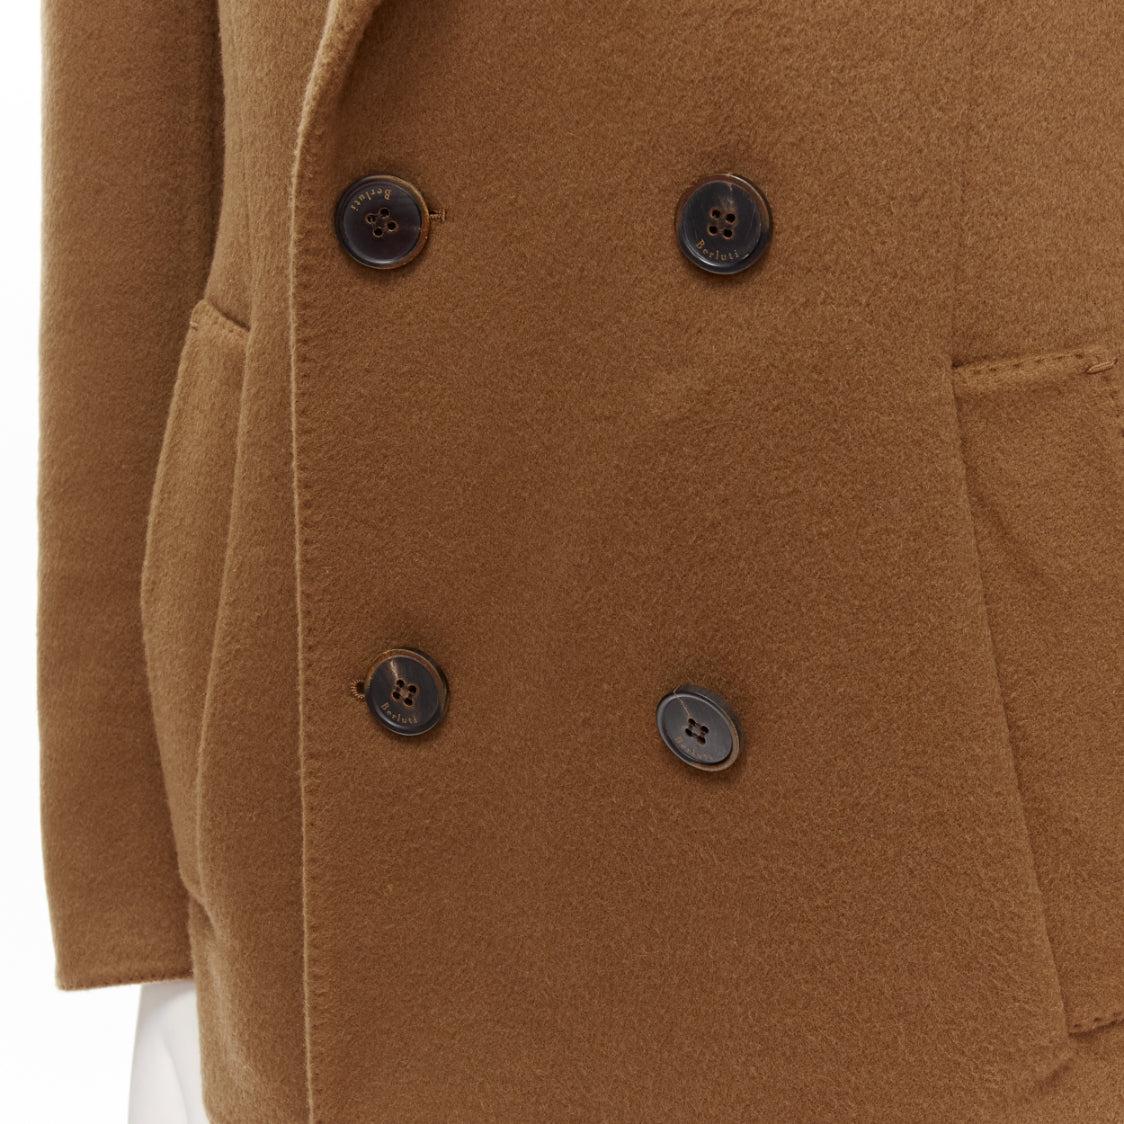 BERLUTI 100% cashmere double faced double breasted jacket IT50 L
Reference: CNLE/A00250
Brand: Berluti
Material: Cashmere
Color: Brown
Pattern: Solid
Closure: Button
Lining: Grey Cashmere
Extra Details: Double breasted. single vent back. Cowhide